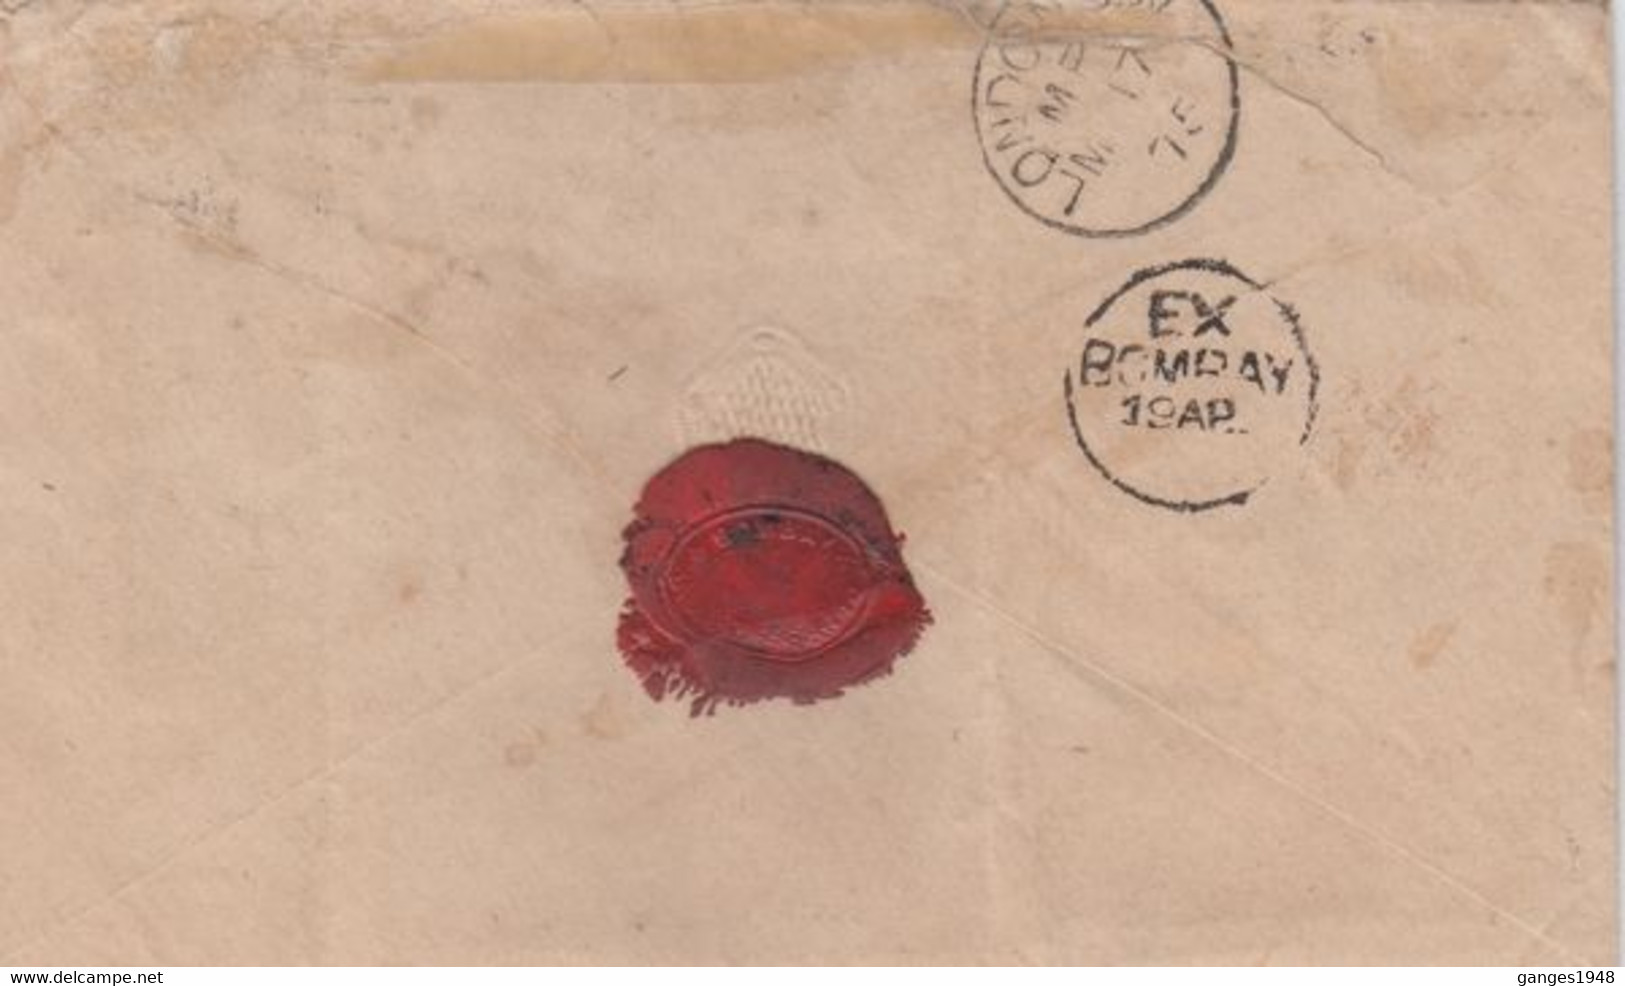 1875  QV  12A  Franked Cover 1 Stamp Removed  GIRGAUM Bombay  W C / 4  Local Canc To London   #  26228 D  Inde  Indien - 1854 Compañia Británica De Las Indias